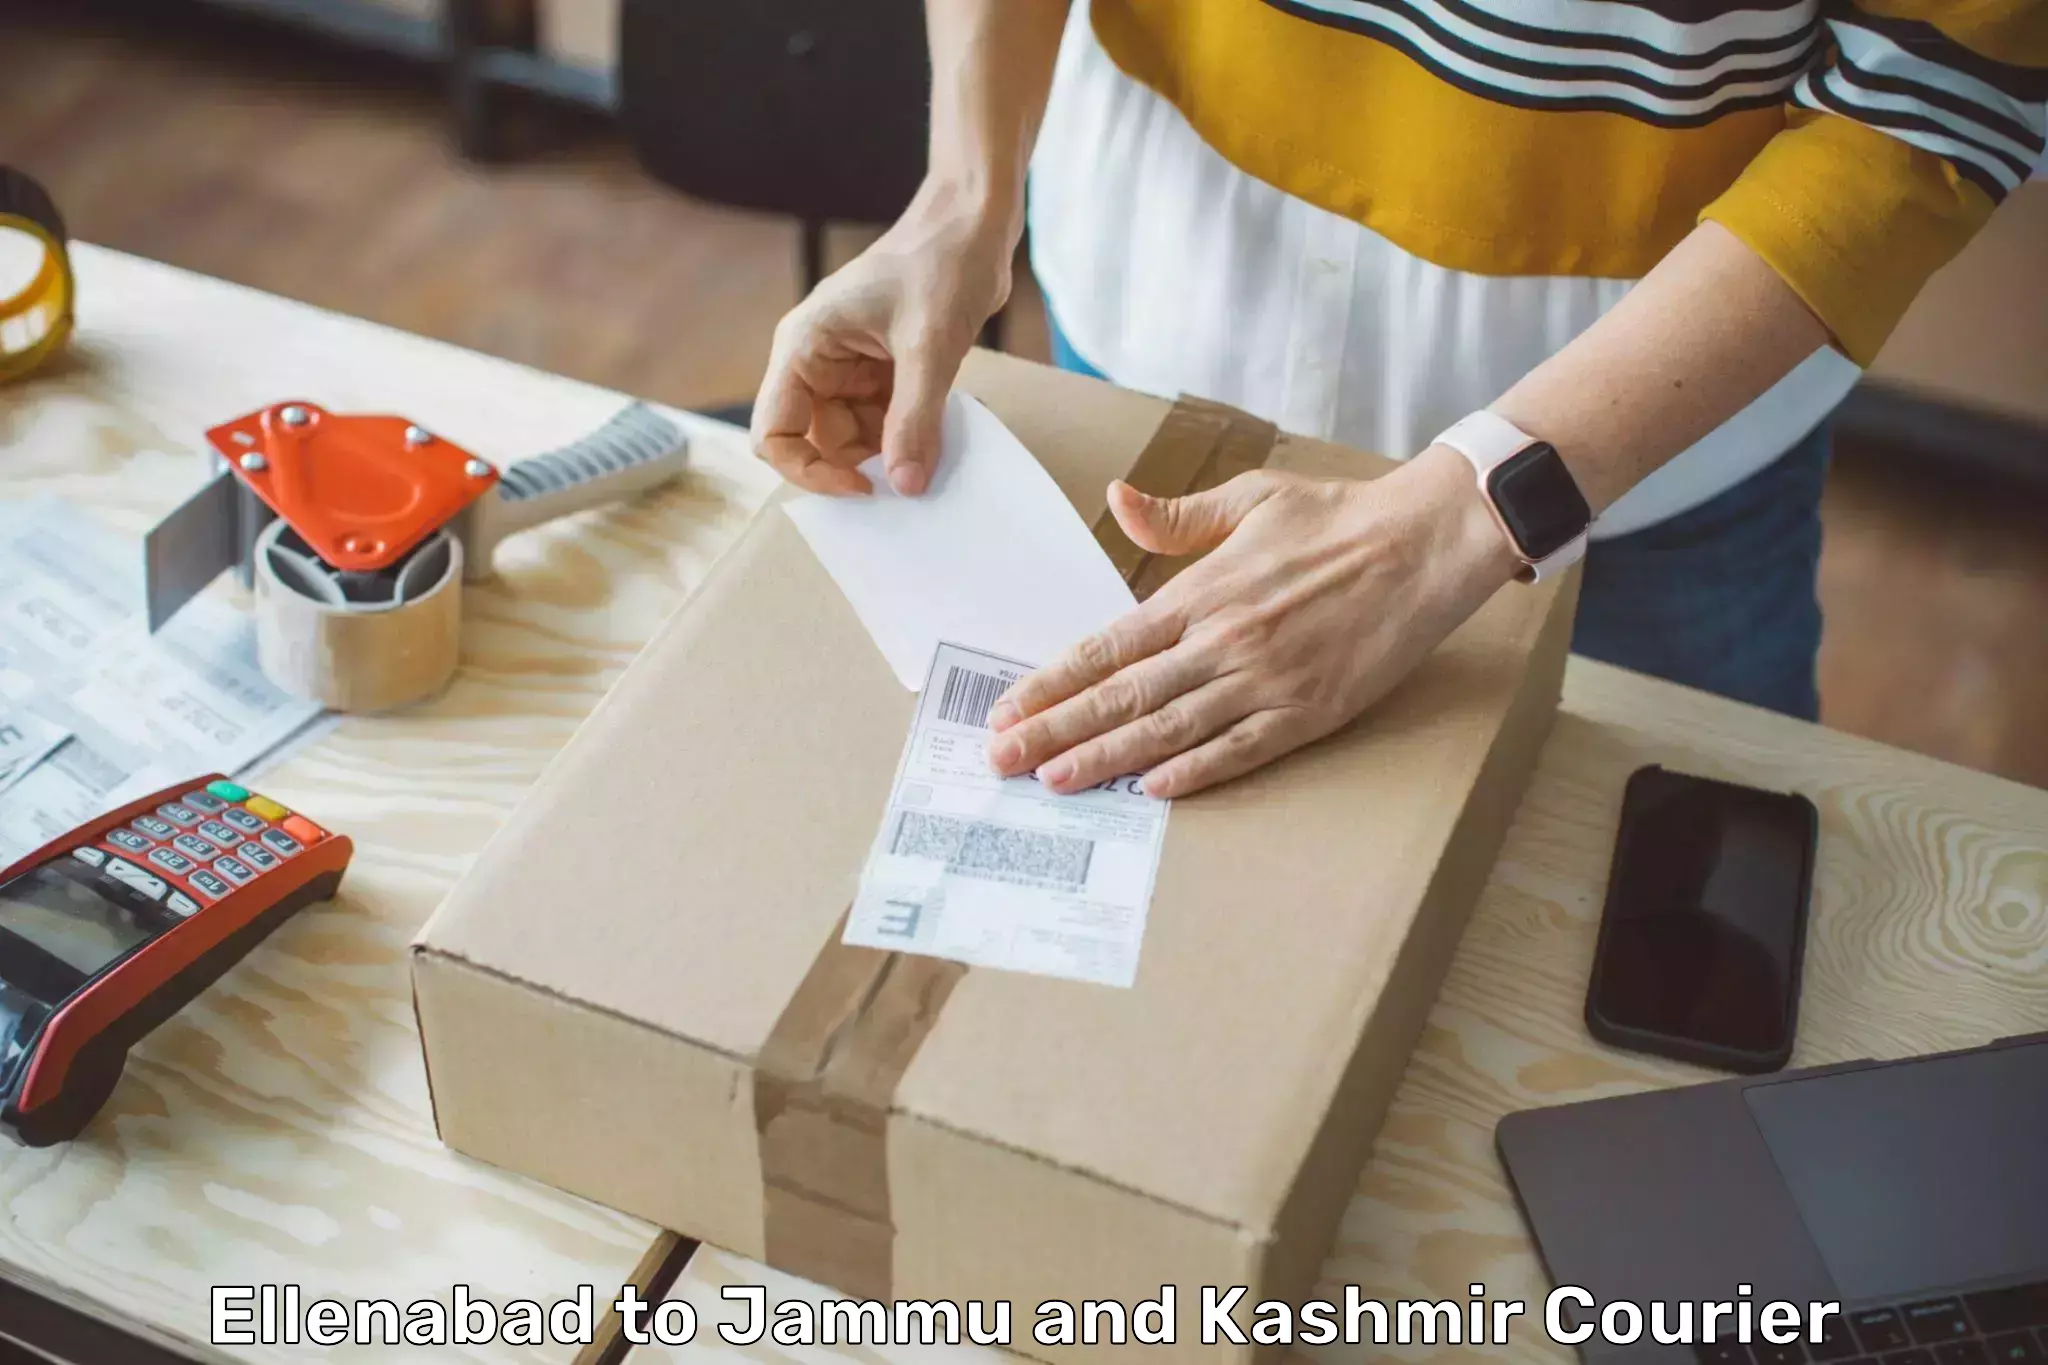 Courier services in Ellenabad to Rajouri